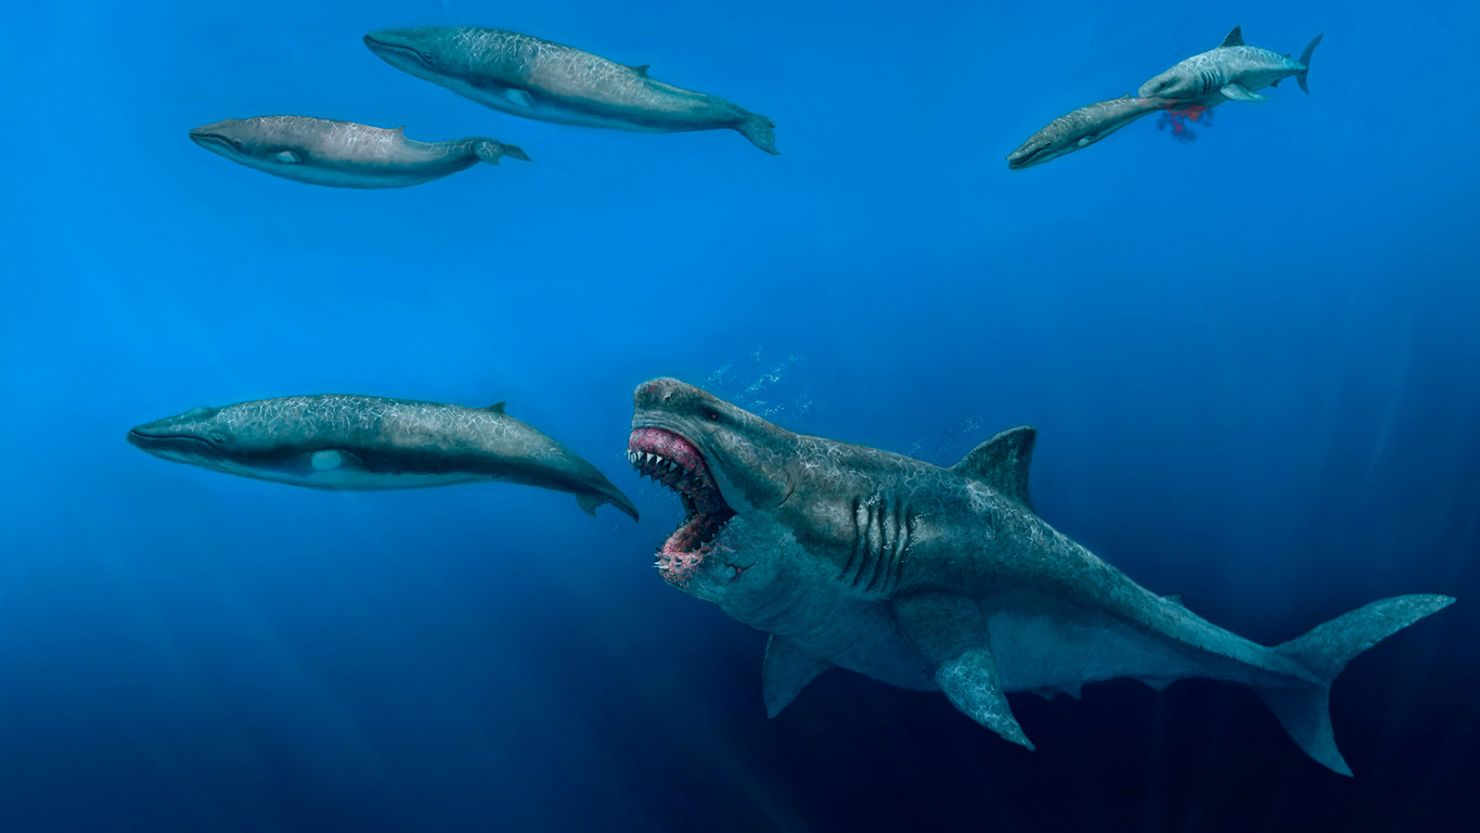 This illustration depicts a 52-foot Otodus megalodon shark predating on a 26-foot Balaenoptera whale in the Pliocene epoch, between 5.4 to 2.4 million years ago.